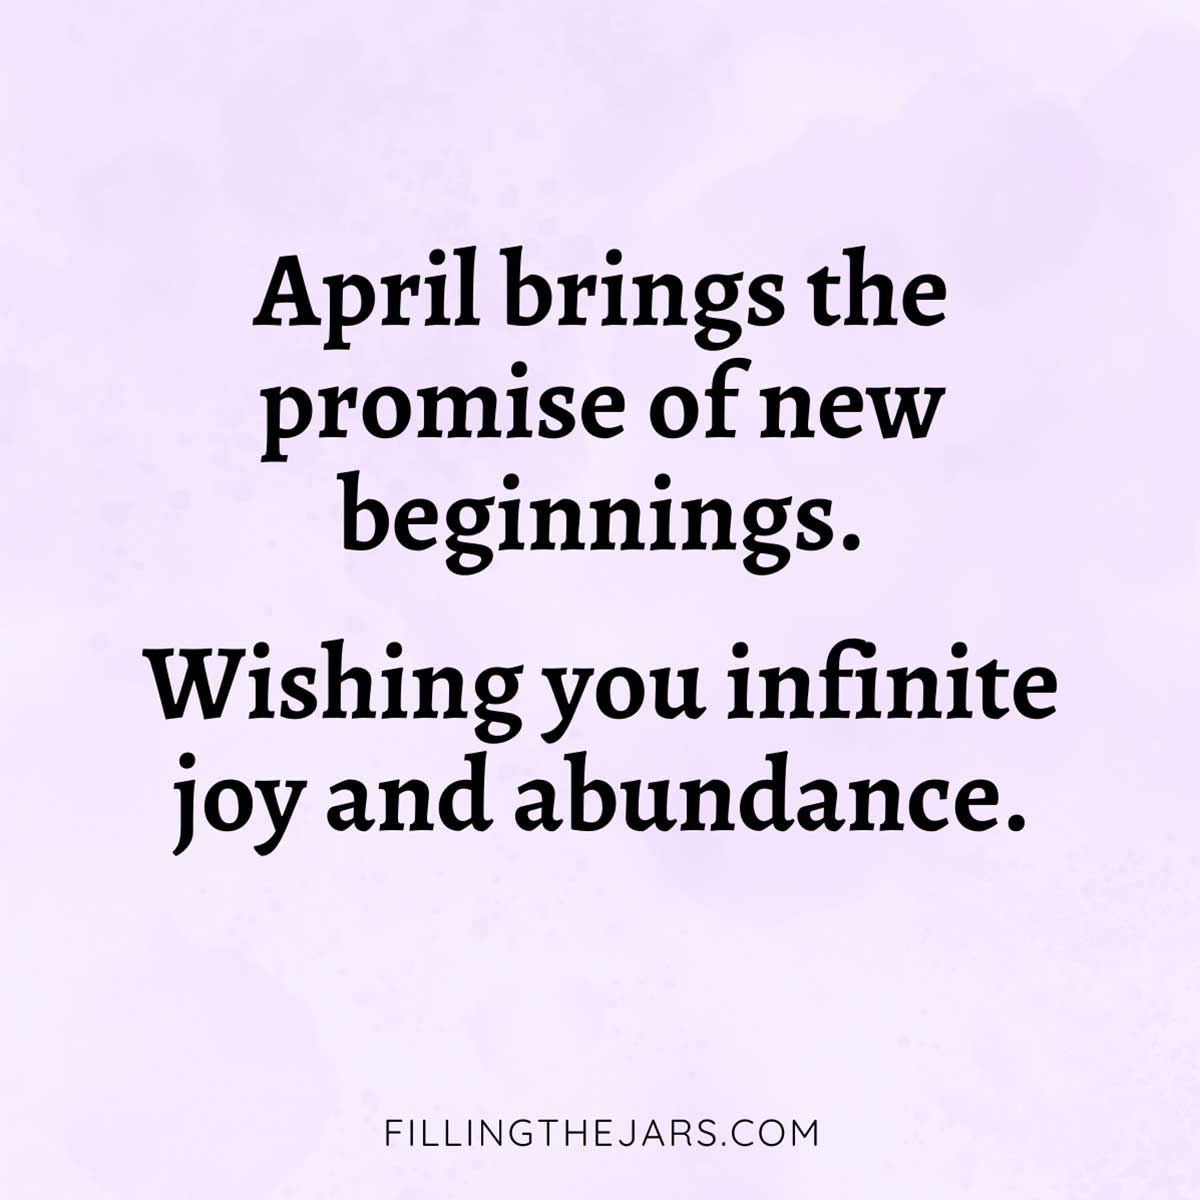 April wishes saying in black text on mottled lavender background.